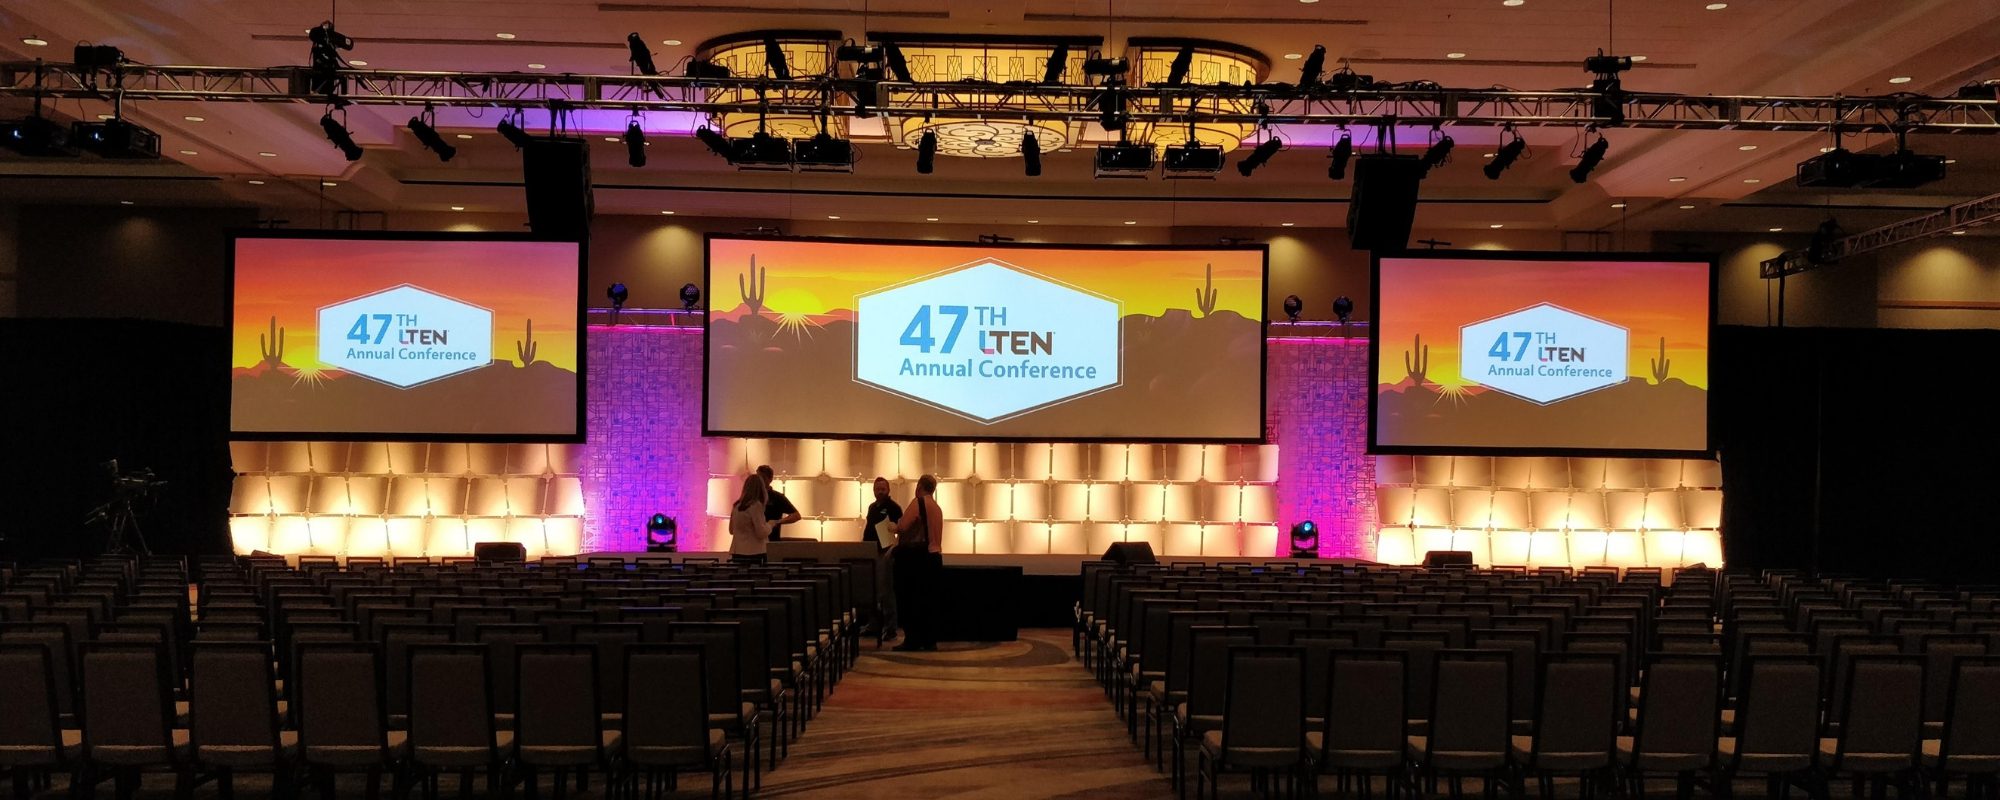 18 Creative Ideas for Corporate Stage Design